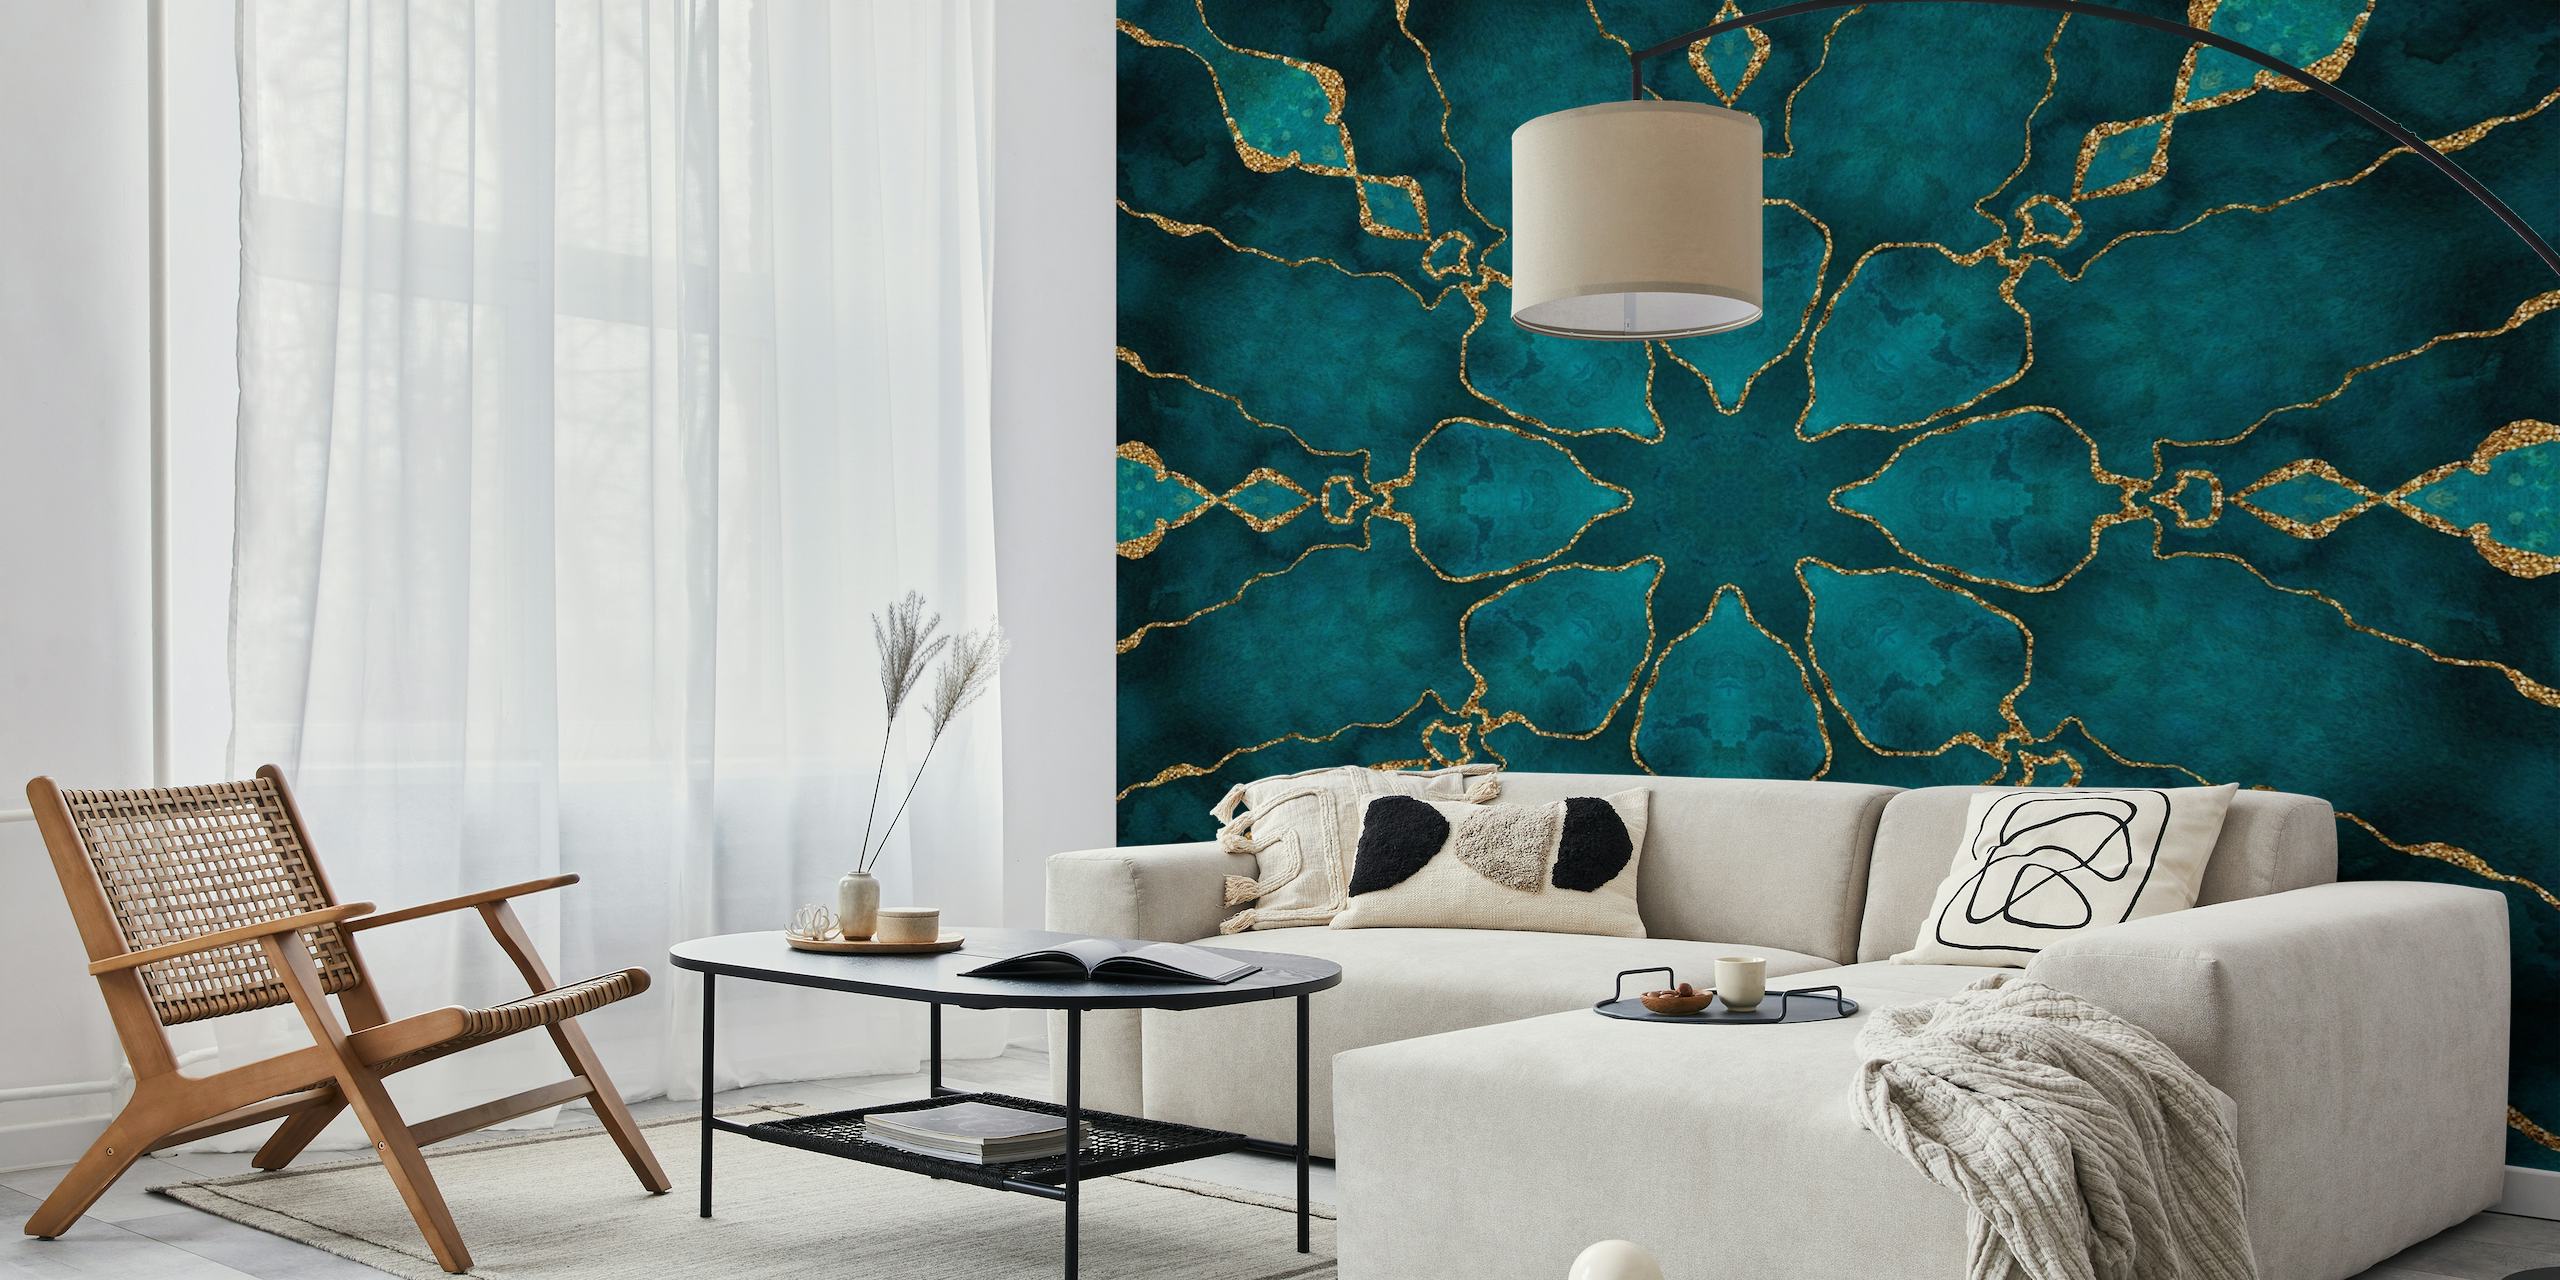 Turquoise and gold mandala wall mural with intricate pattern design